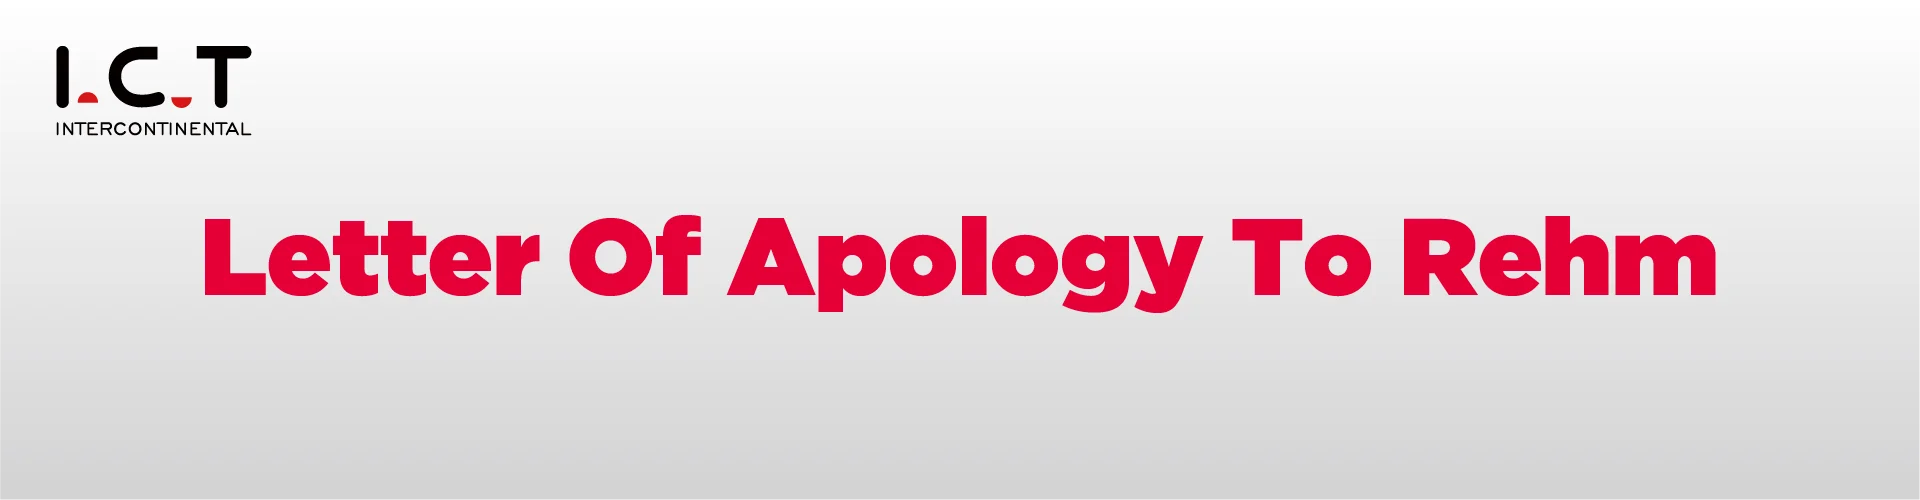 Letter of apology (2).png